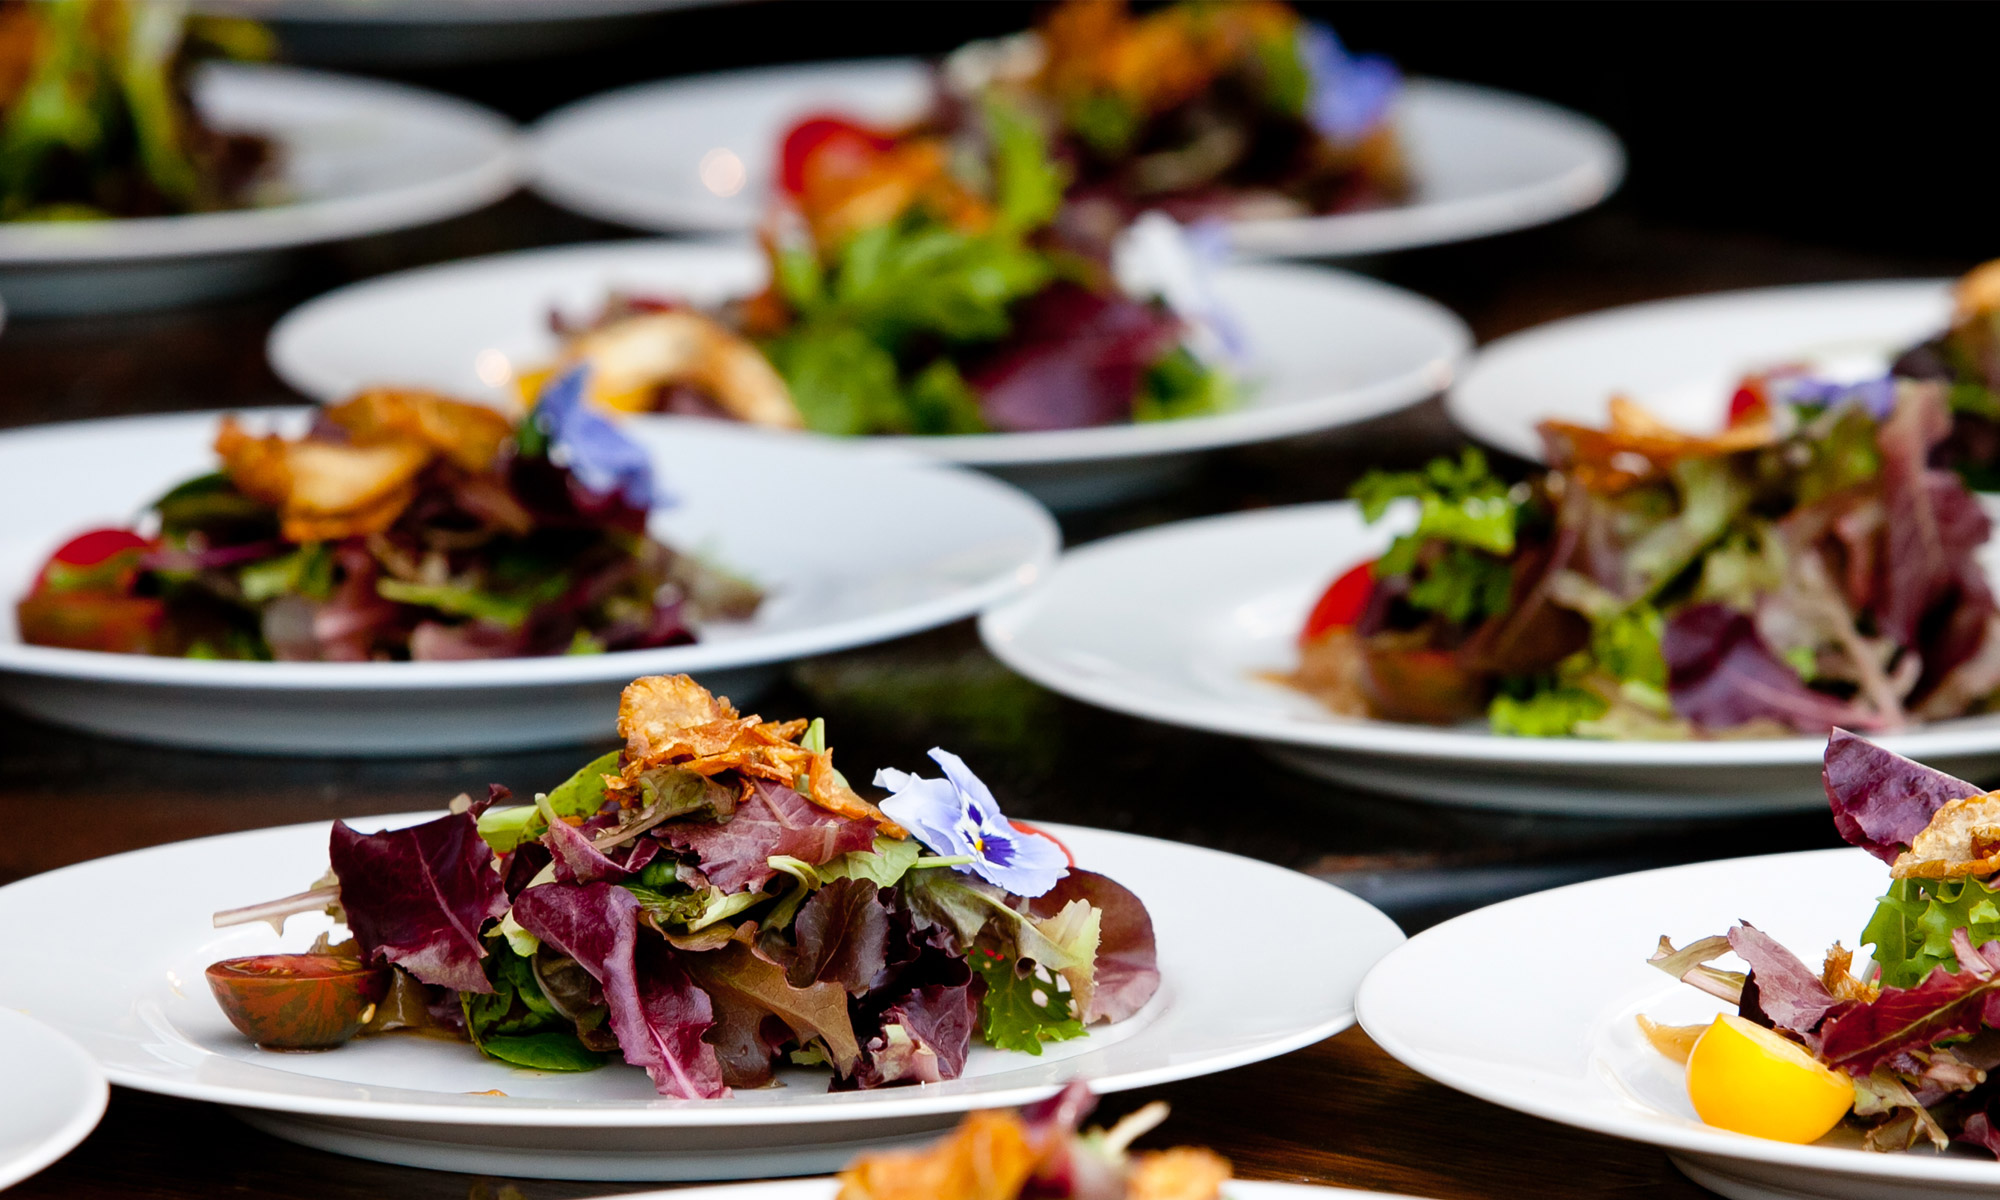 Buffet Style or Sit Down Service? Choosing the Right Meal for your Reception